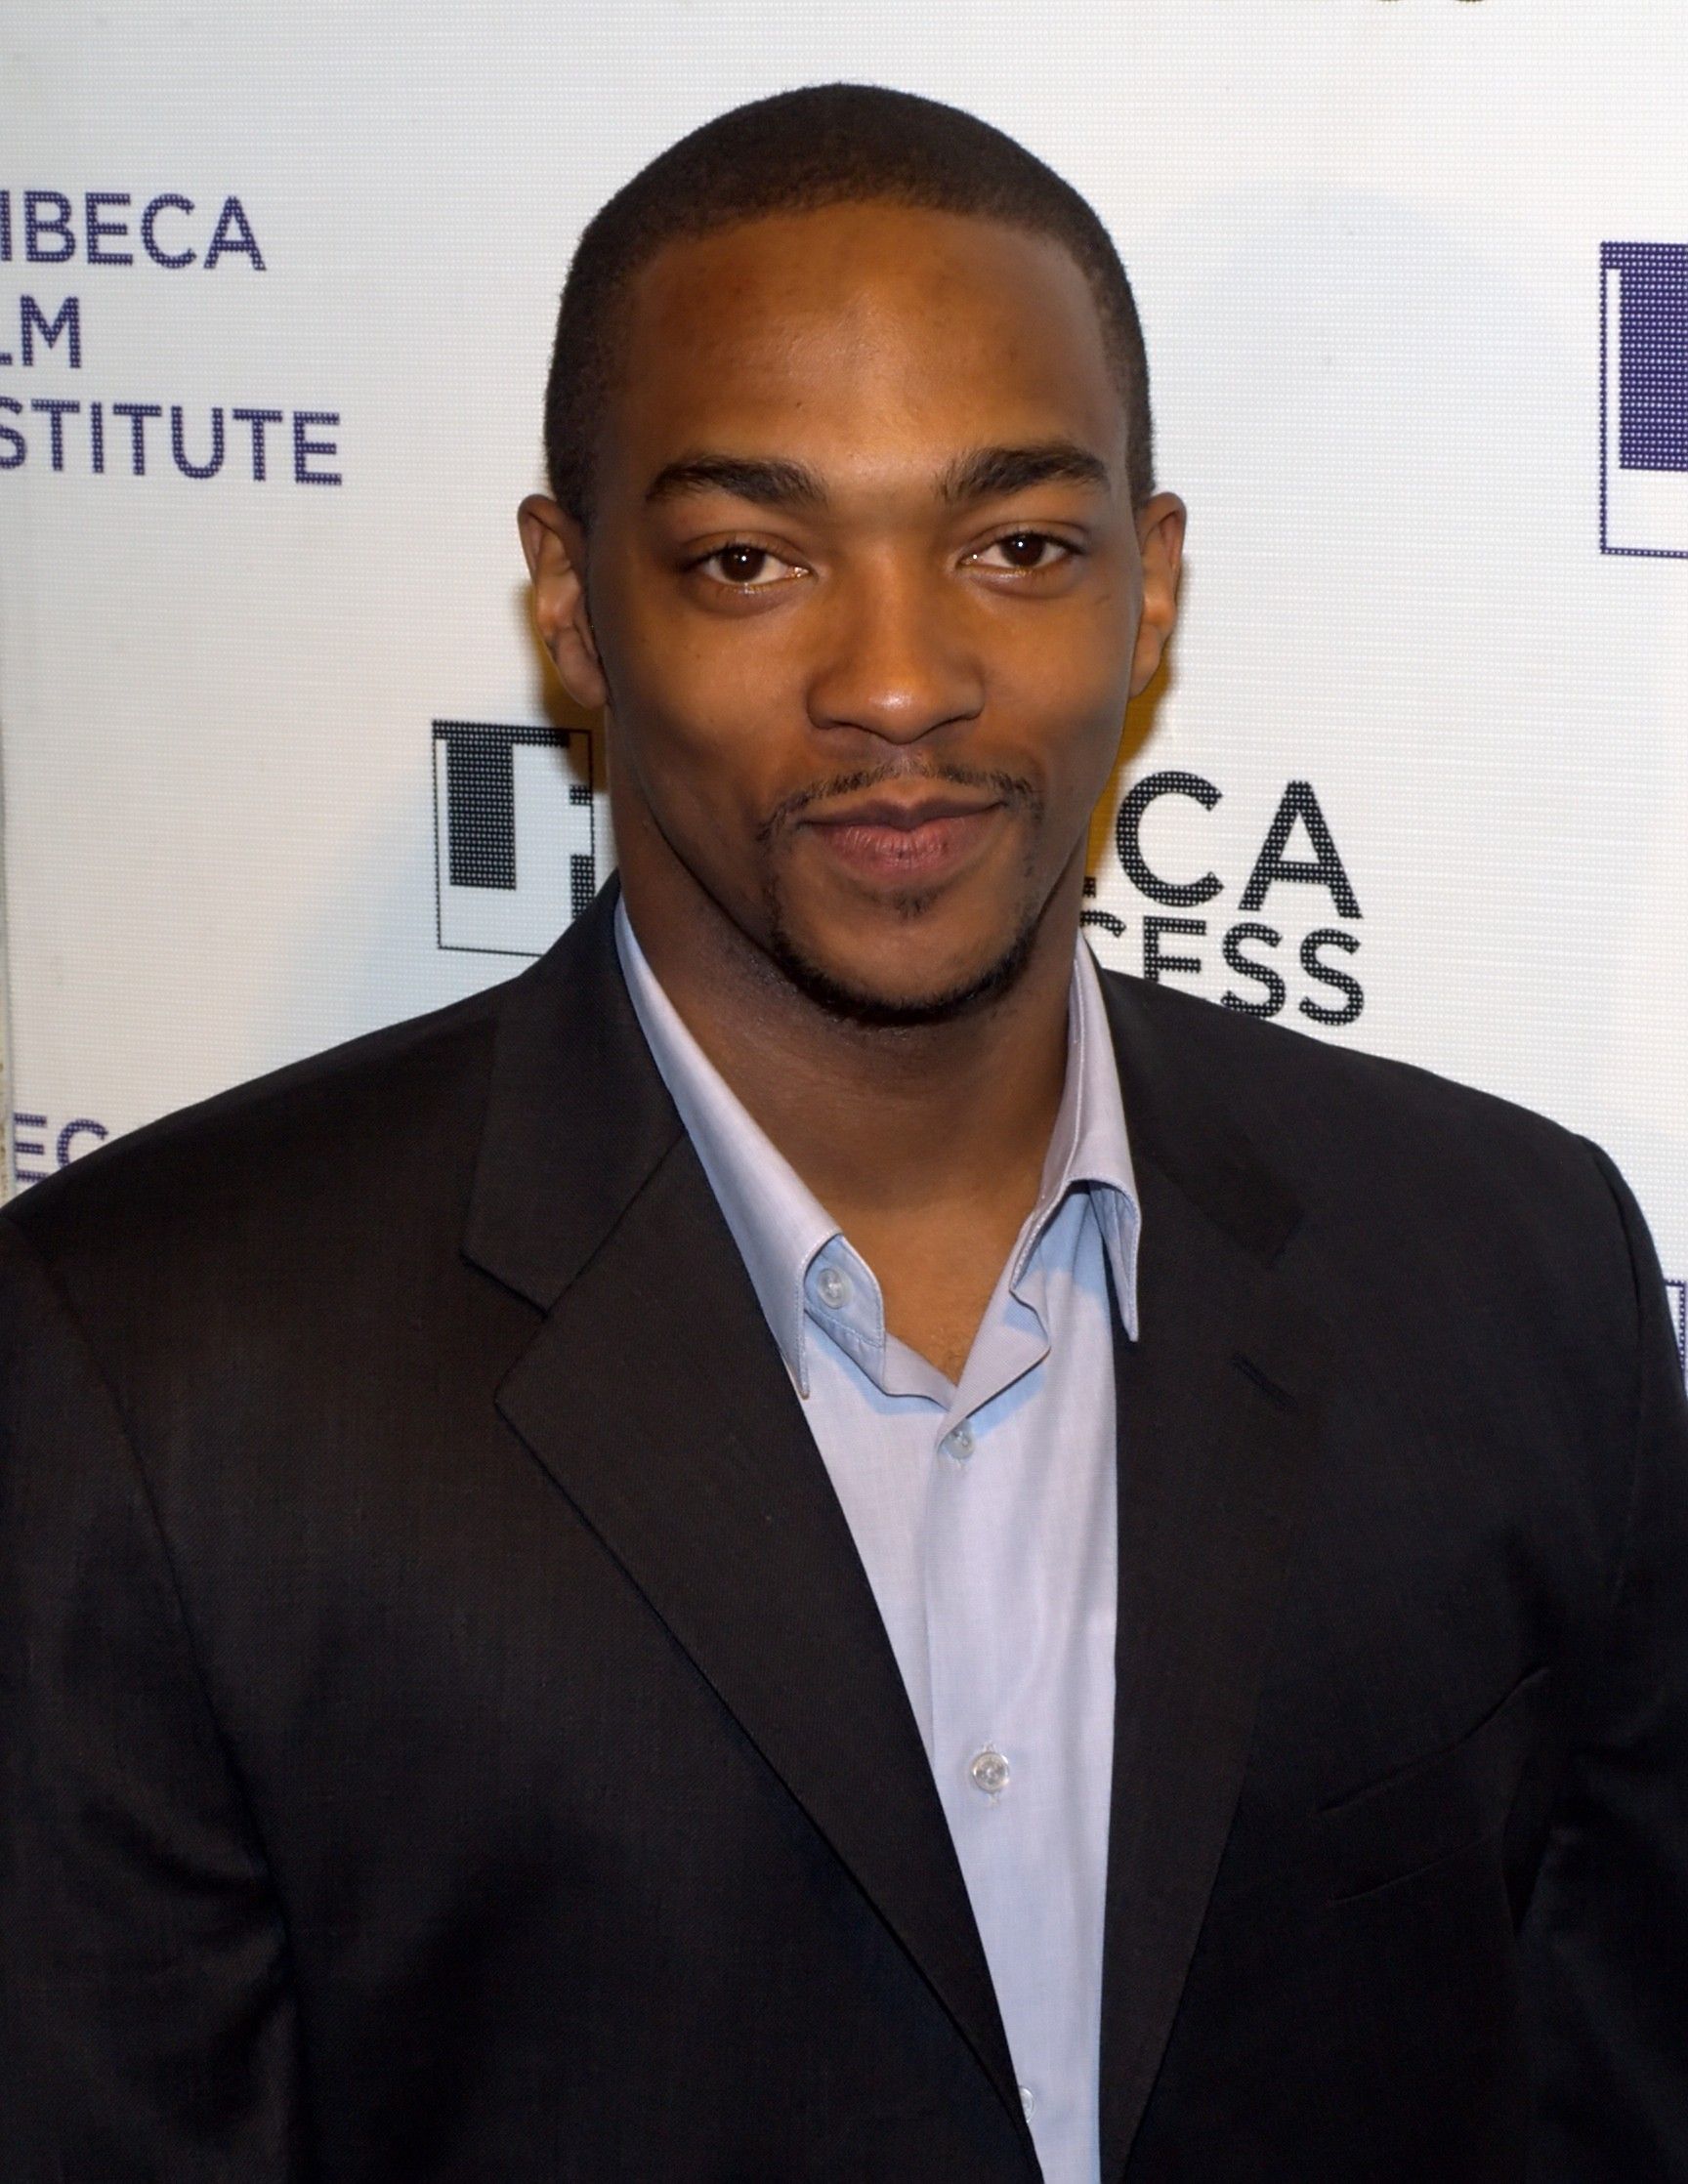 Gallery Tabloid Actor: Anthony Mackie Wallpaper Actress